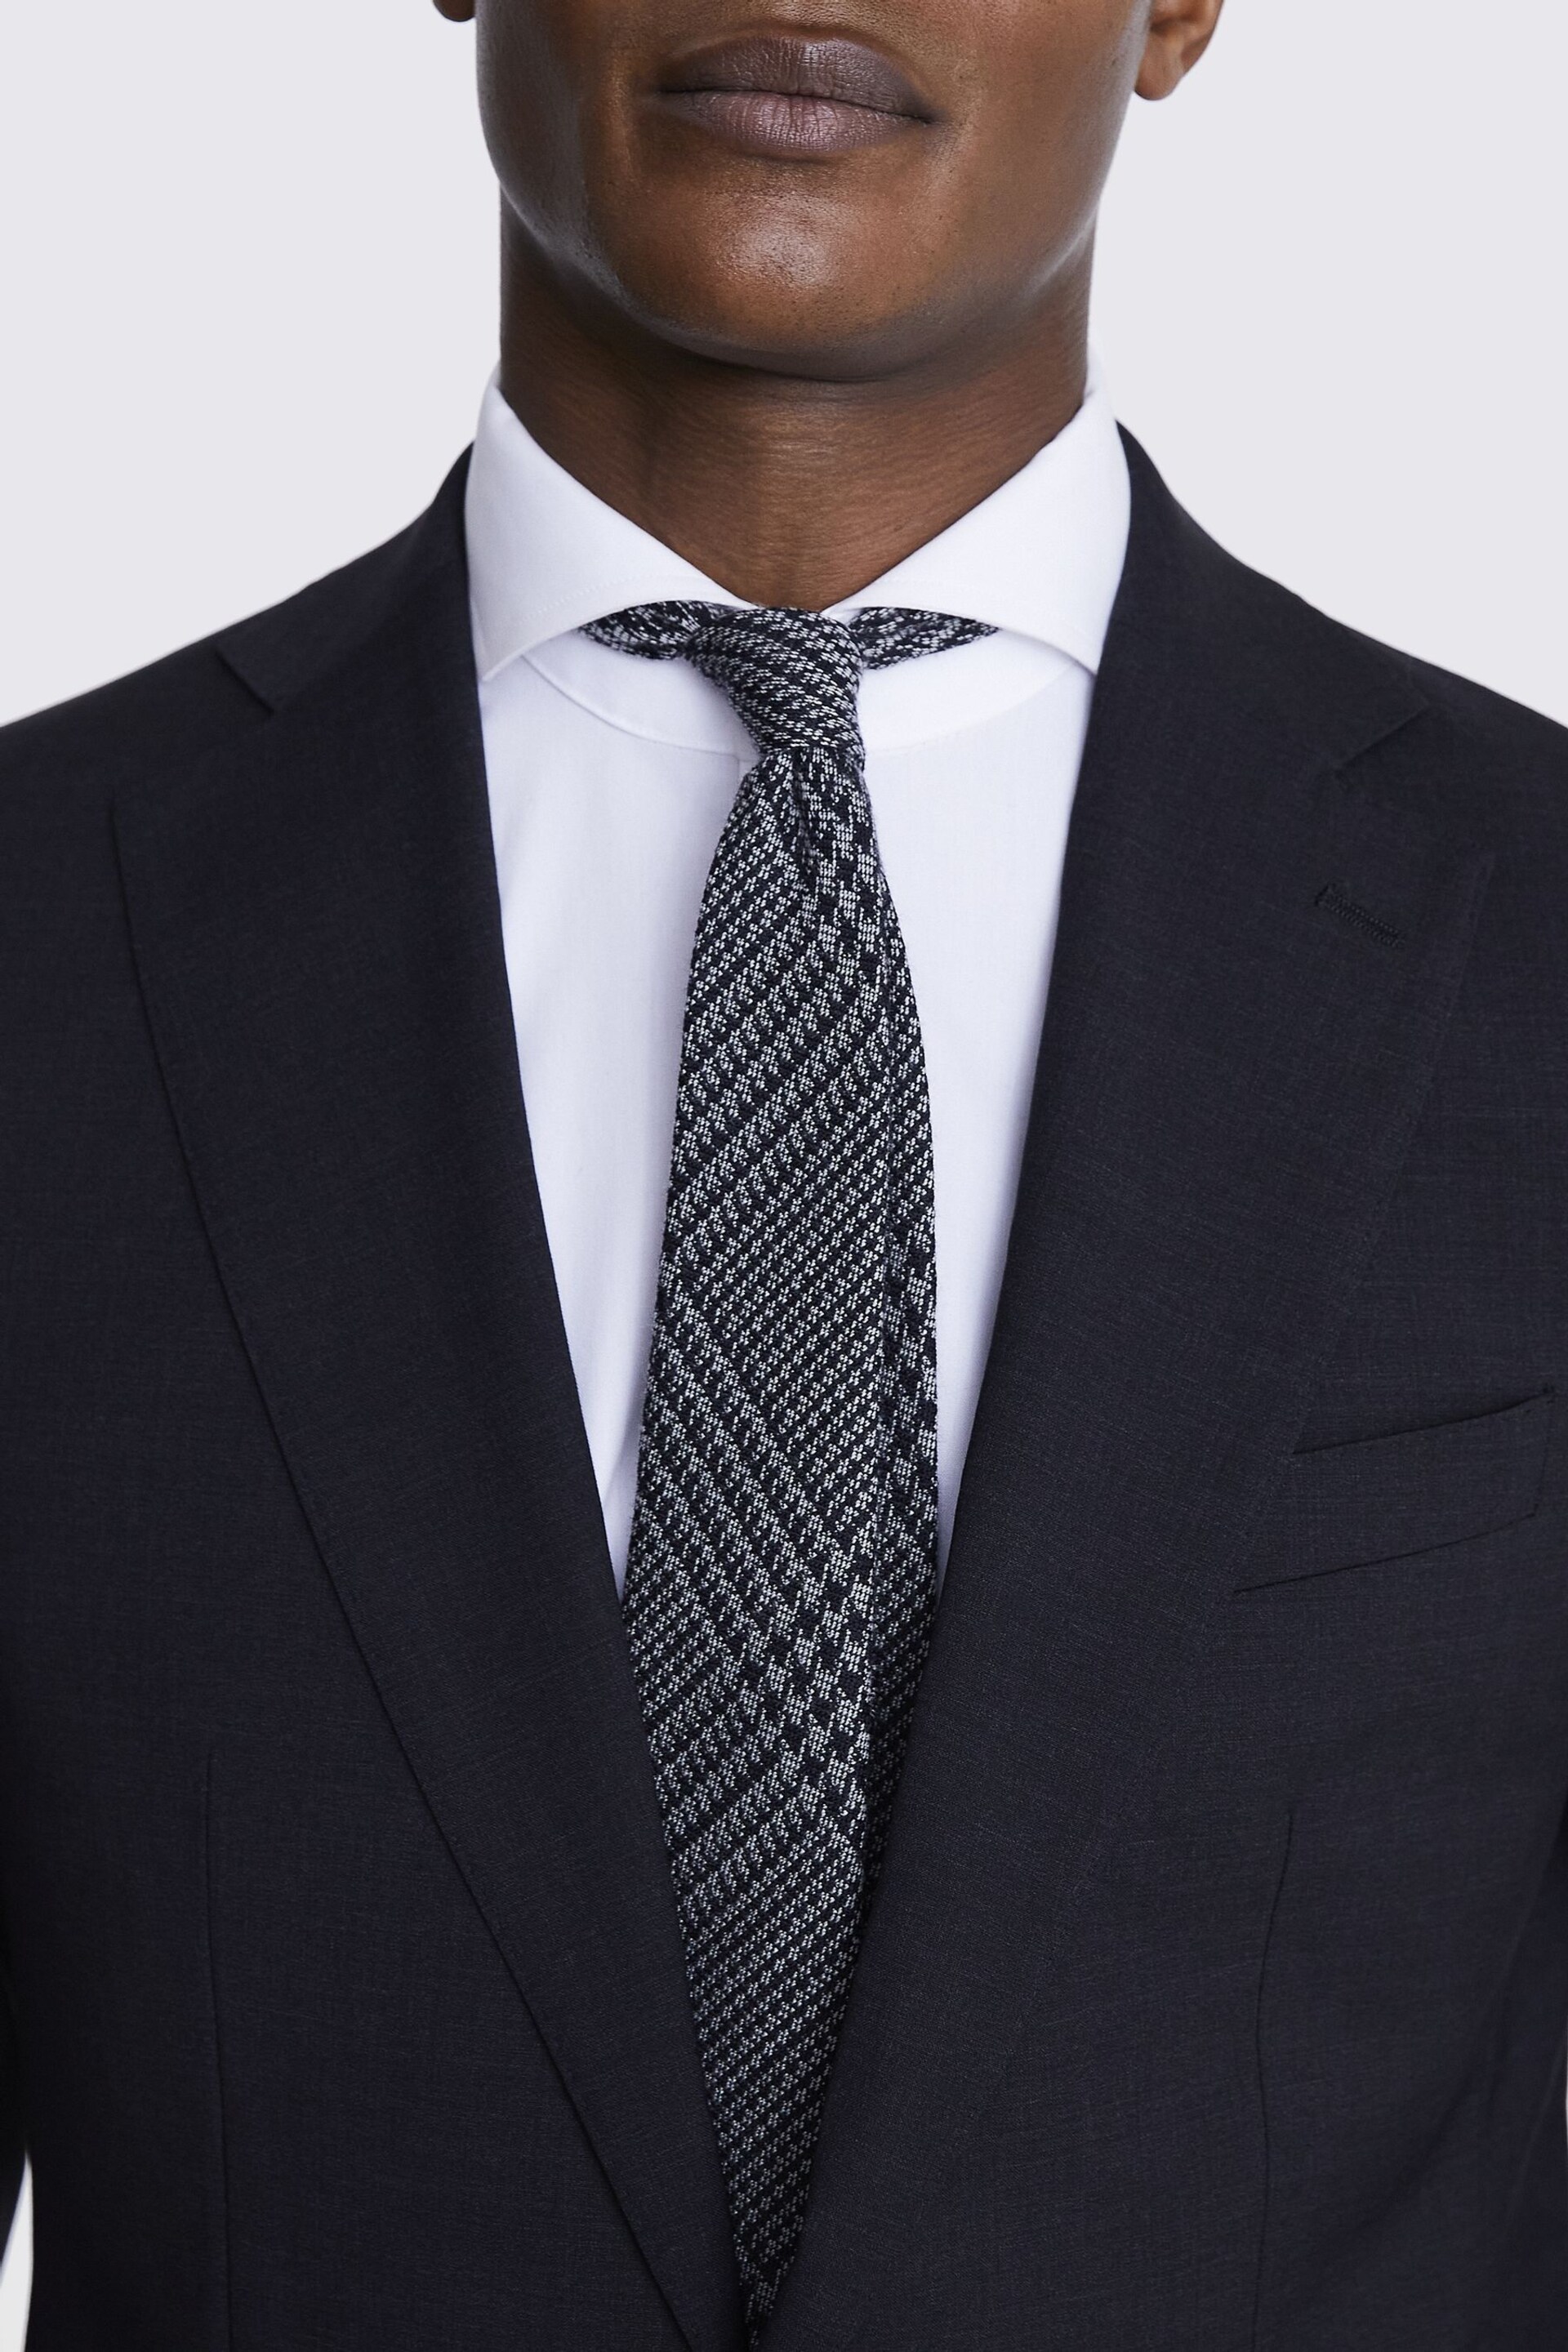 MOSS Charcoal Grey Tailored Fit Performance Suit Jacket - Image 6 of 7